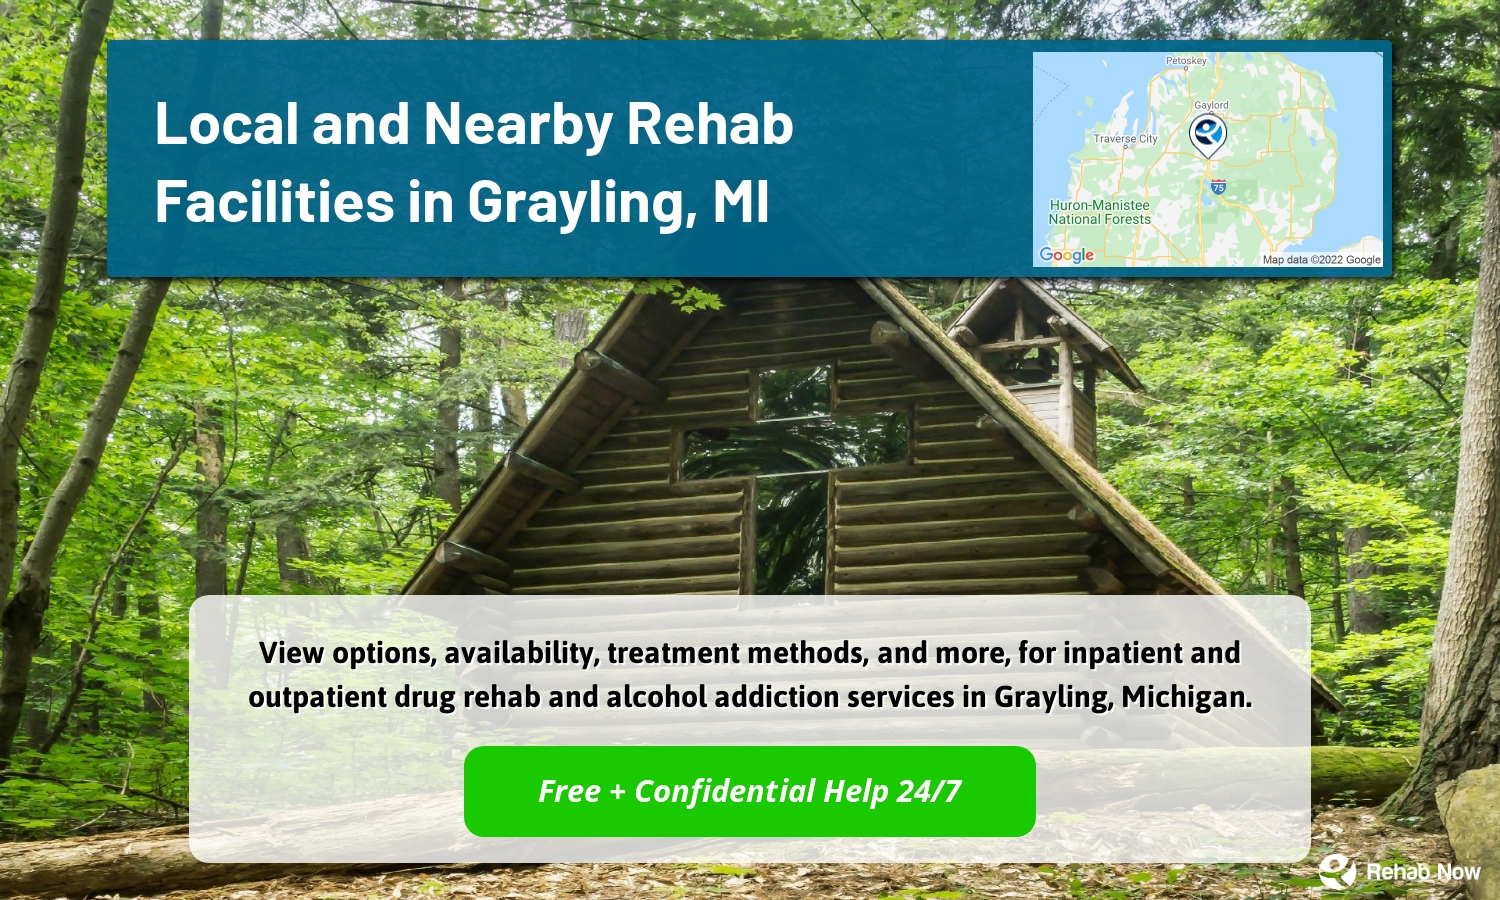 View options, availability, treatment methods, and more, for inpatient and outpatient drug rehab and alcohol addiction services in Grayling, Michigan.